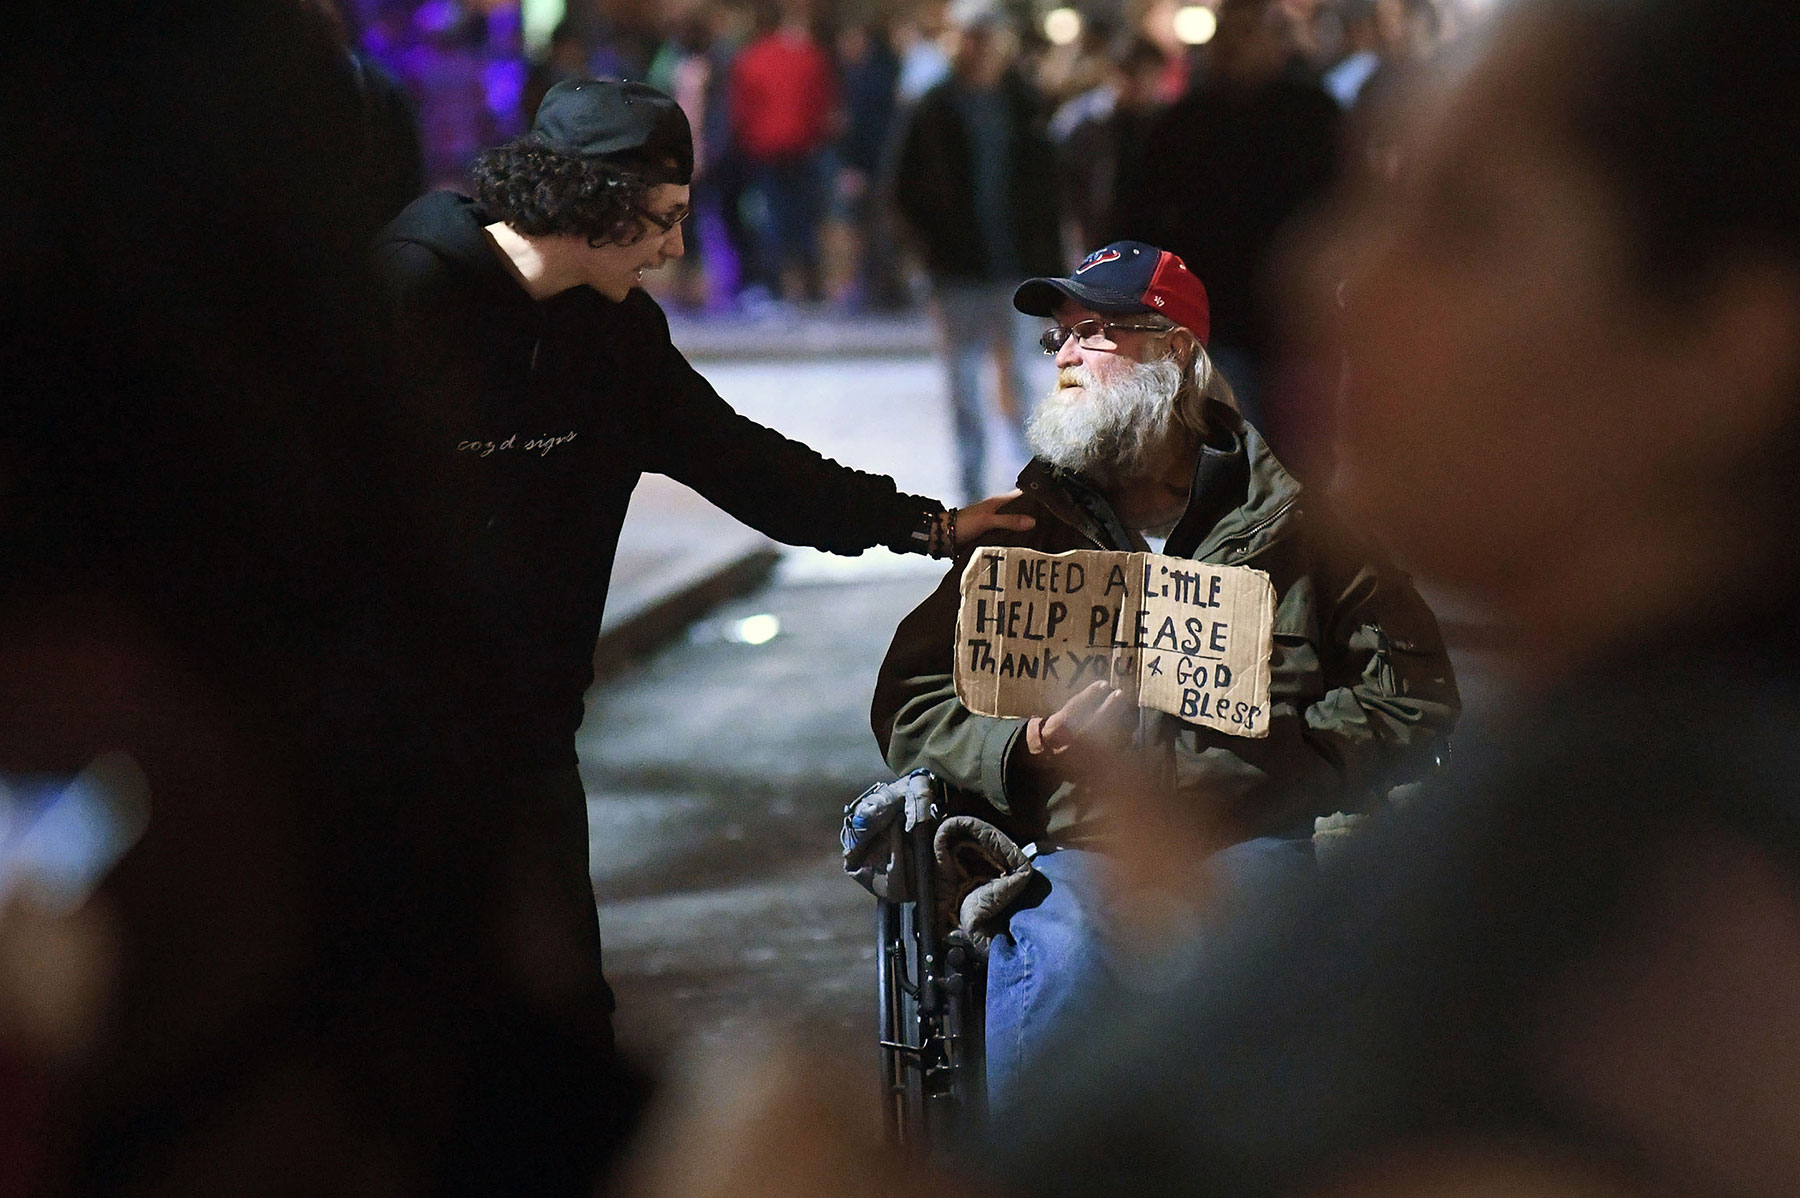  Sixth Street reveler takes time to speak with a man in need